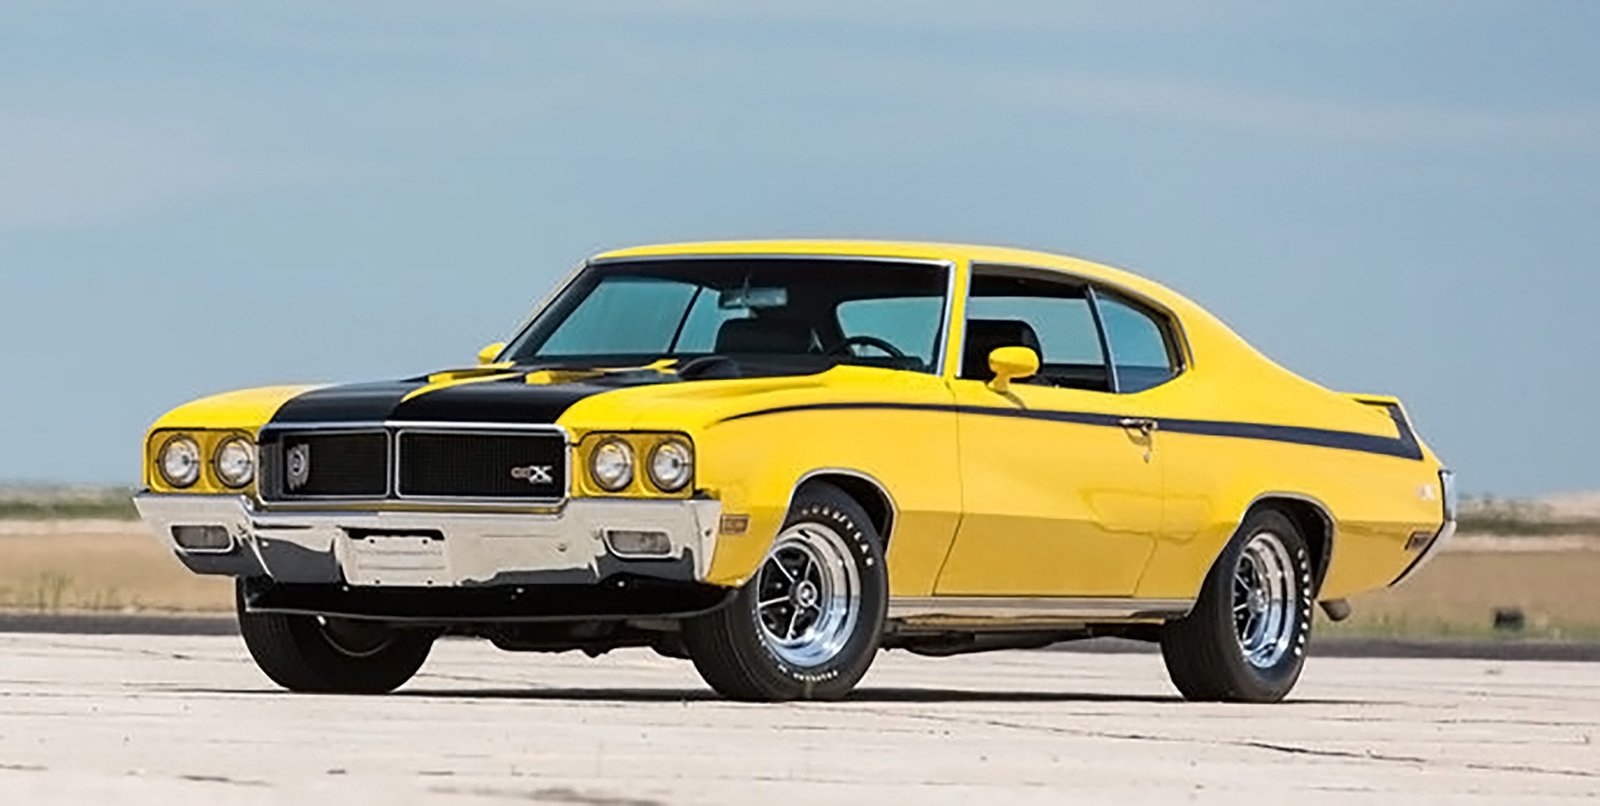 rare-rides-the-1970-buick-gsx-and-gsx-stage-1-2020-03-28_11-18-41_569039.jpg